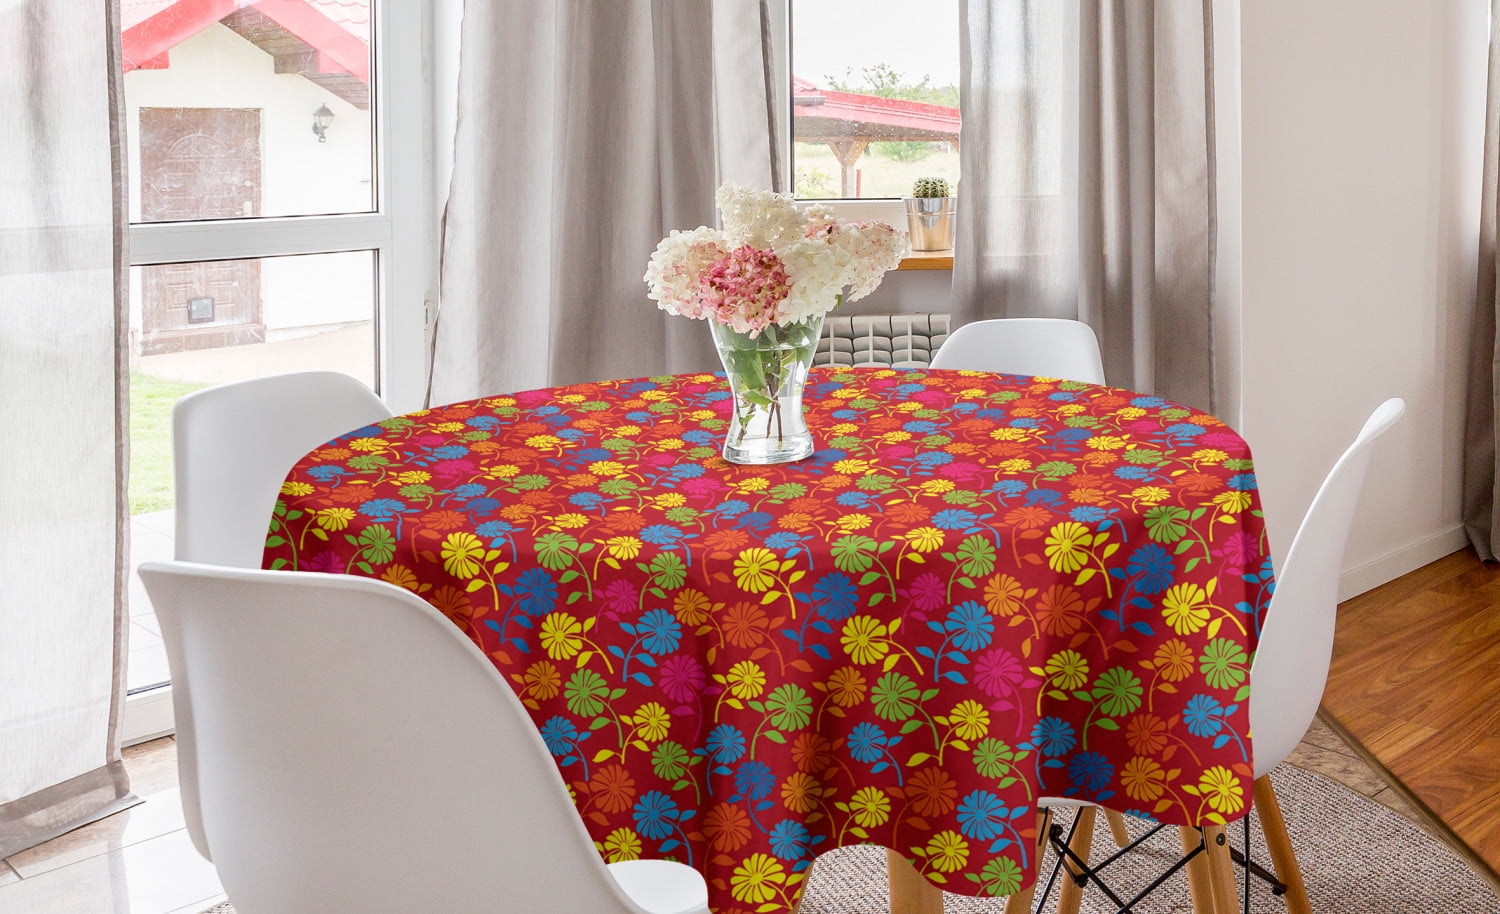 Dining Room Kitchen Rectangular Table Cover Multicolor Scandinavian Leaves and Flowers Pattern with Rainbow Colors Classic Floral Design Ambesonne Colorful Tablecloth 52 X 70